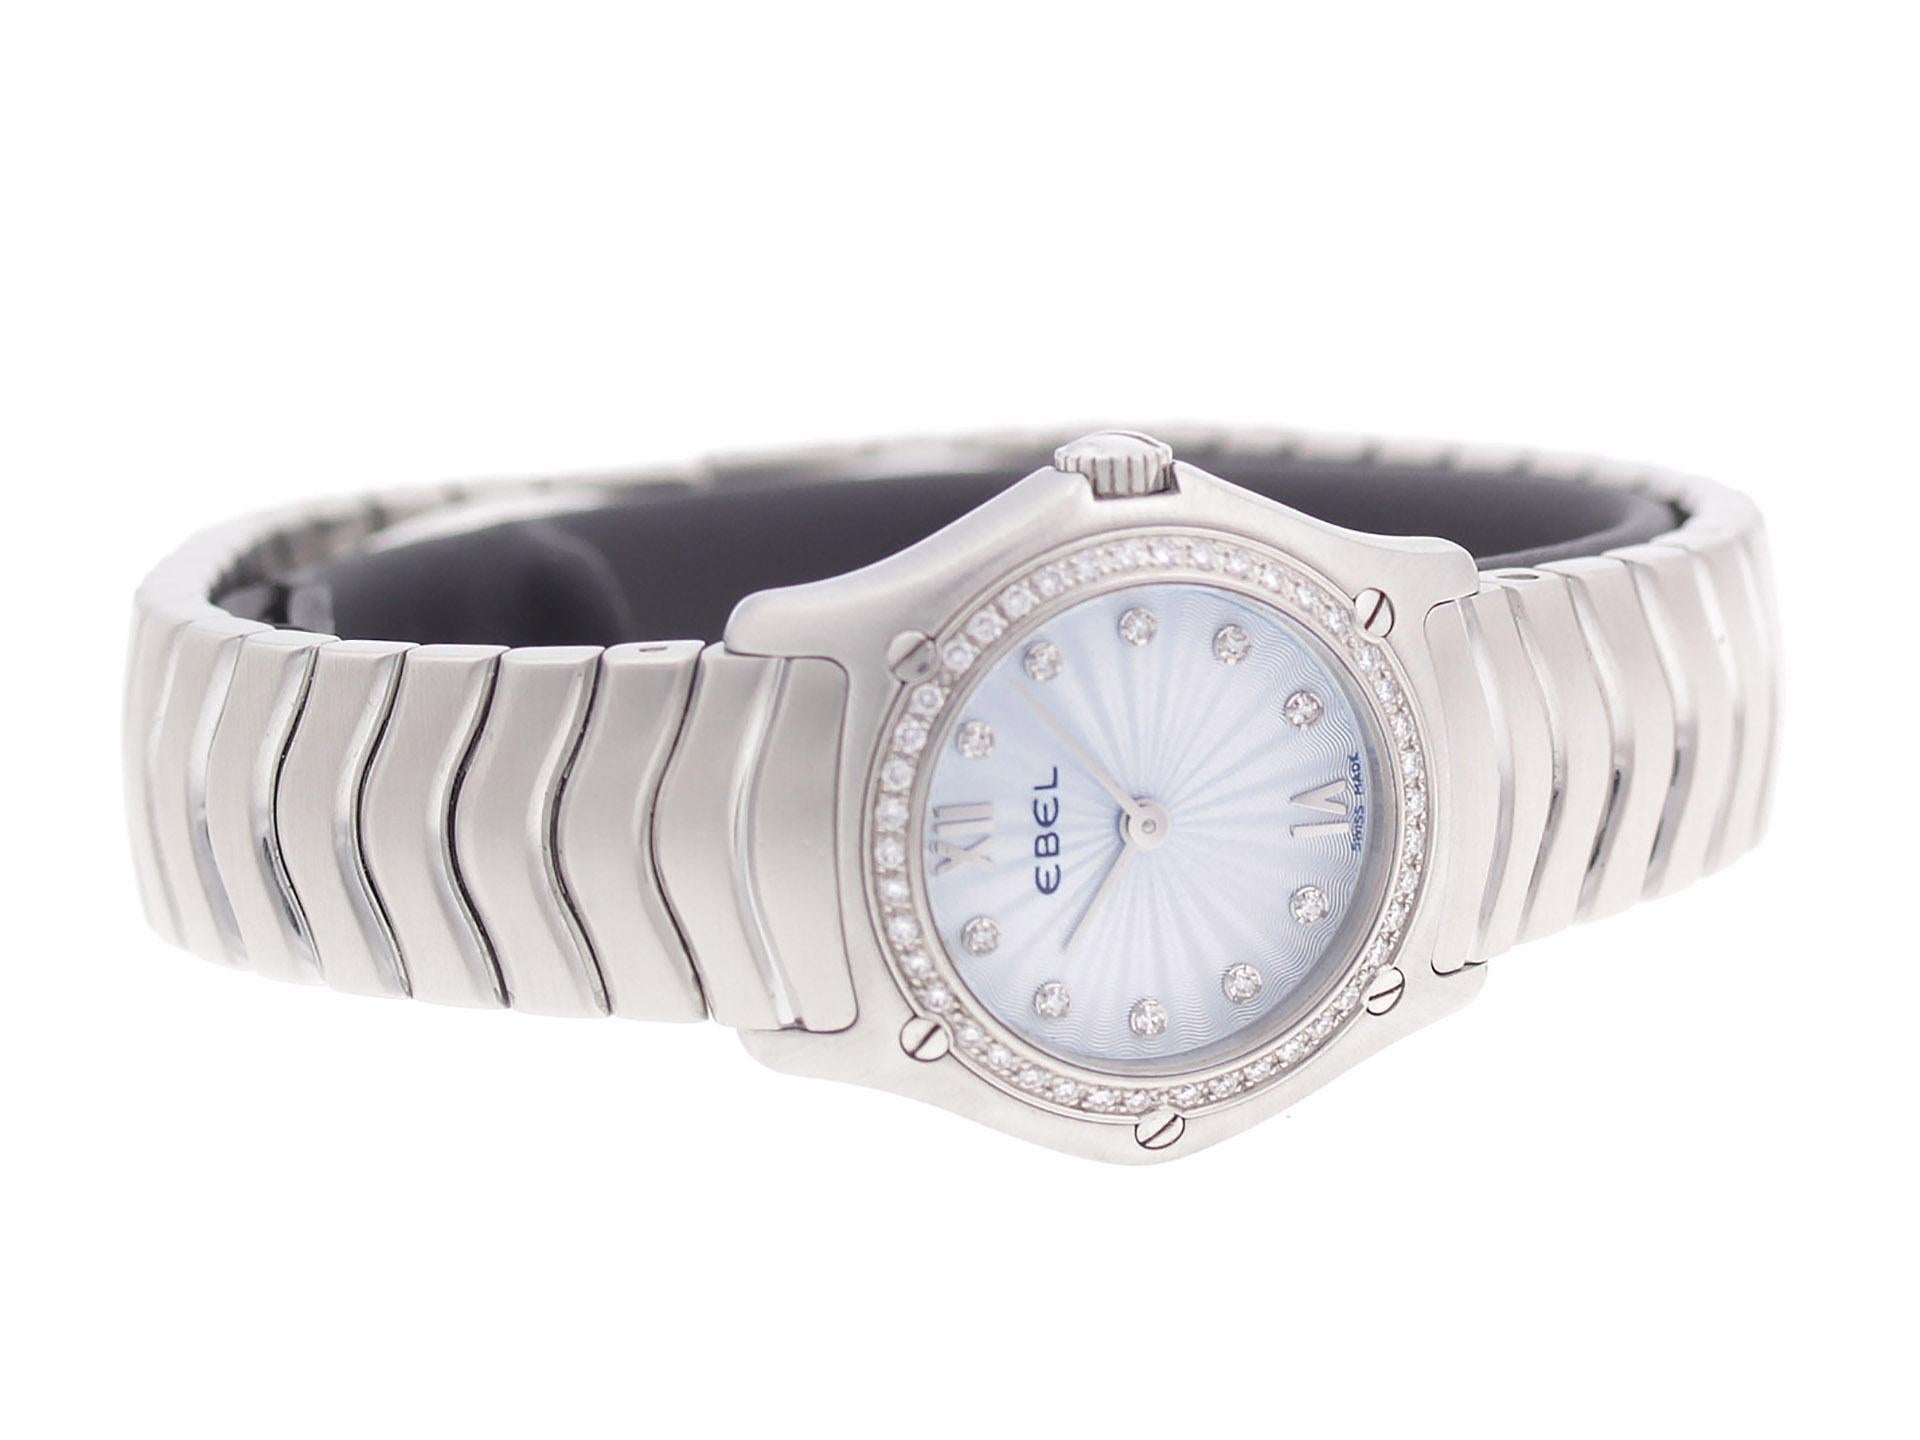 Stainless steel Ebel Classic Wave 9157F14-24725 watch, water resistance to 50m, with diamond bezel & indexes.

Watch	
Brand:	Ebel
Series:	Classic Wave
Model #:	9157F14-24725
Gender:	Ladies’
Condition:	Great Pre-owned, Tiny Dings and Light Scratches